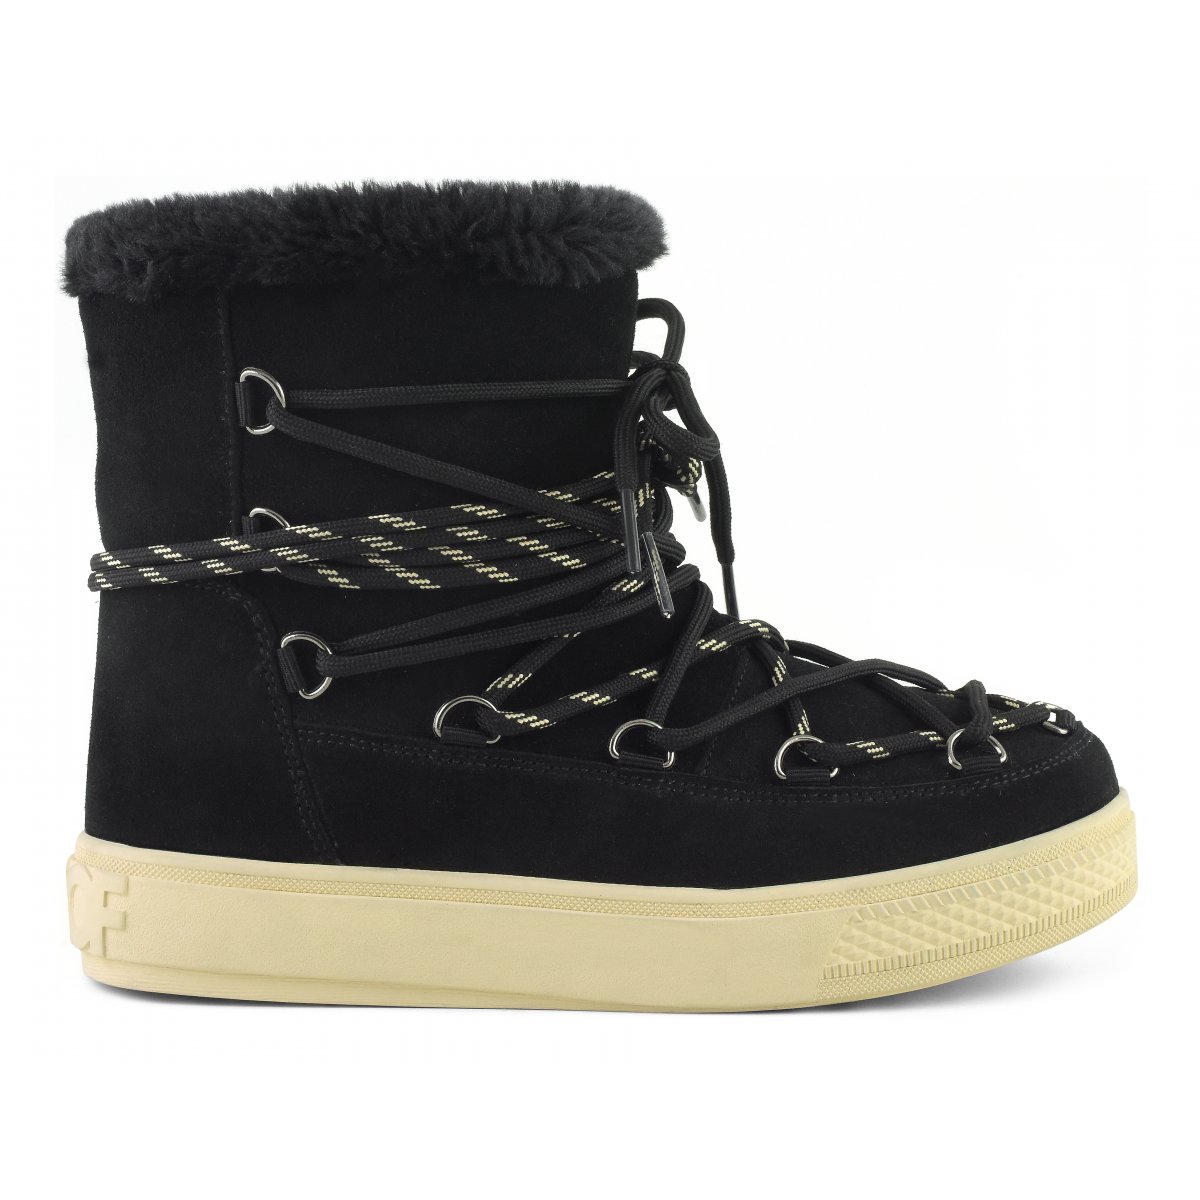 Double-laced leather snow-boot - Woman Colors of California Women